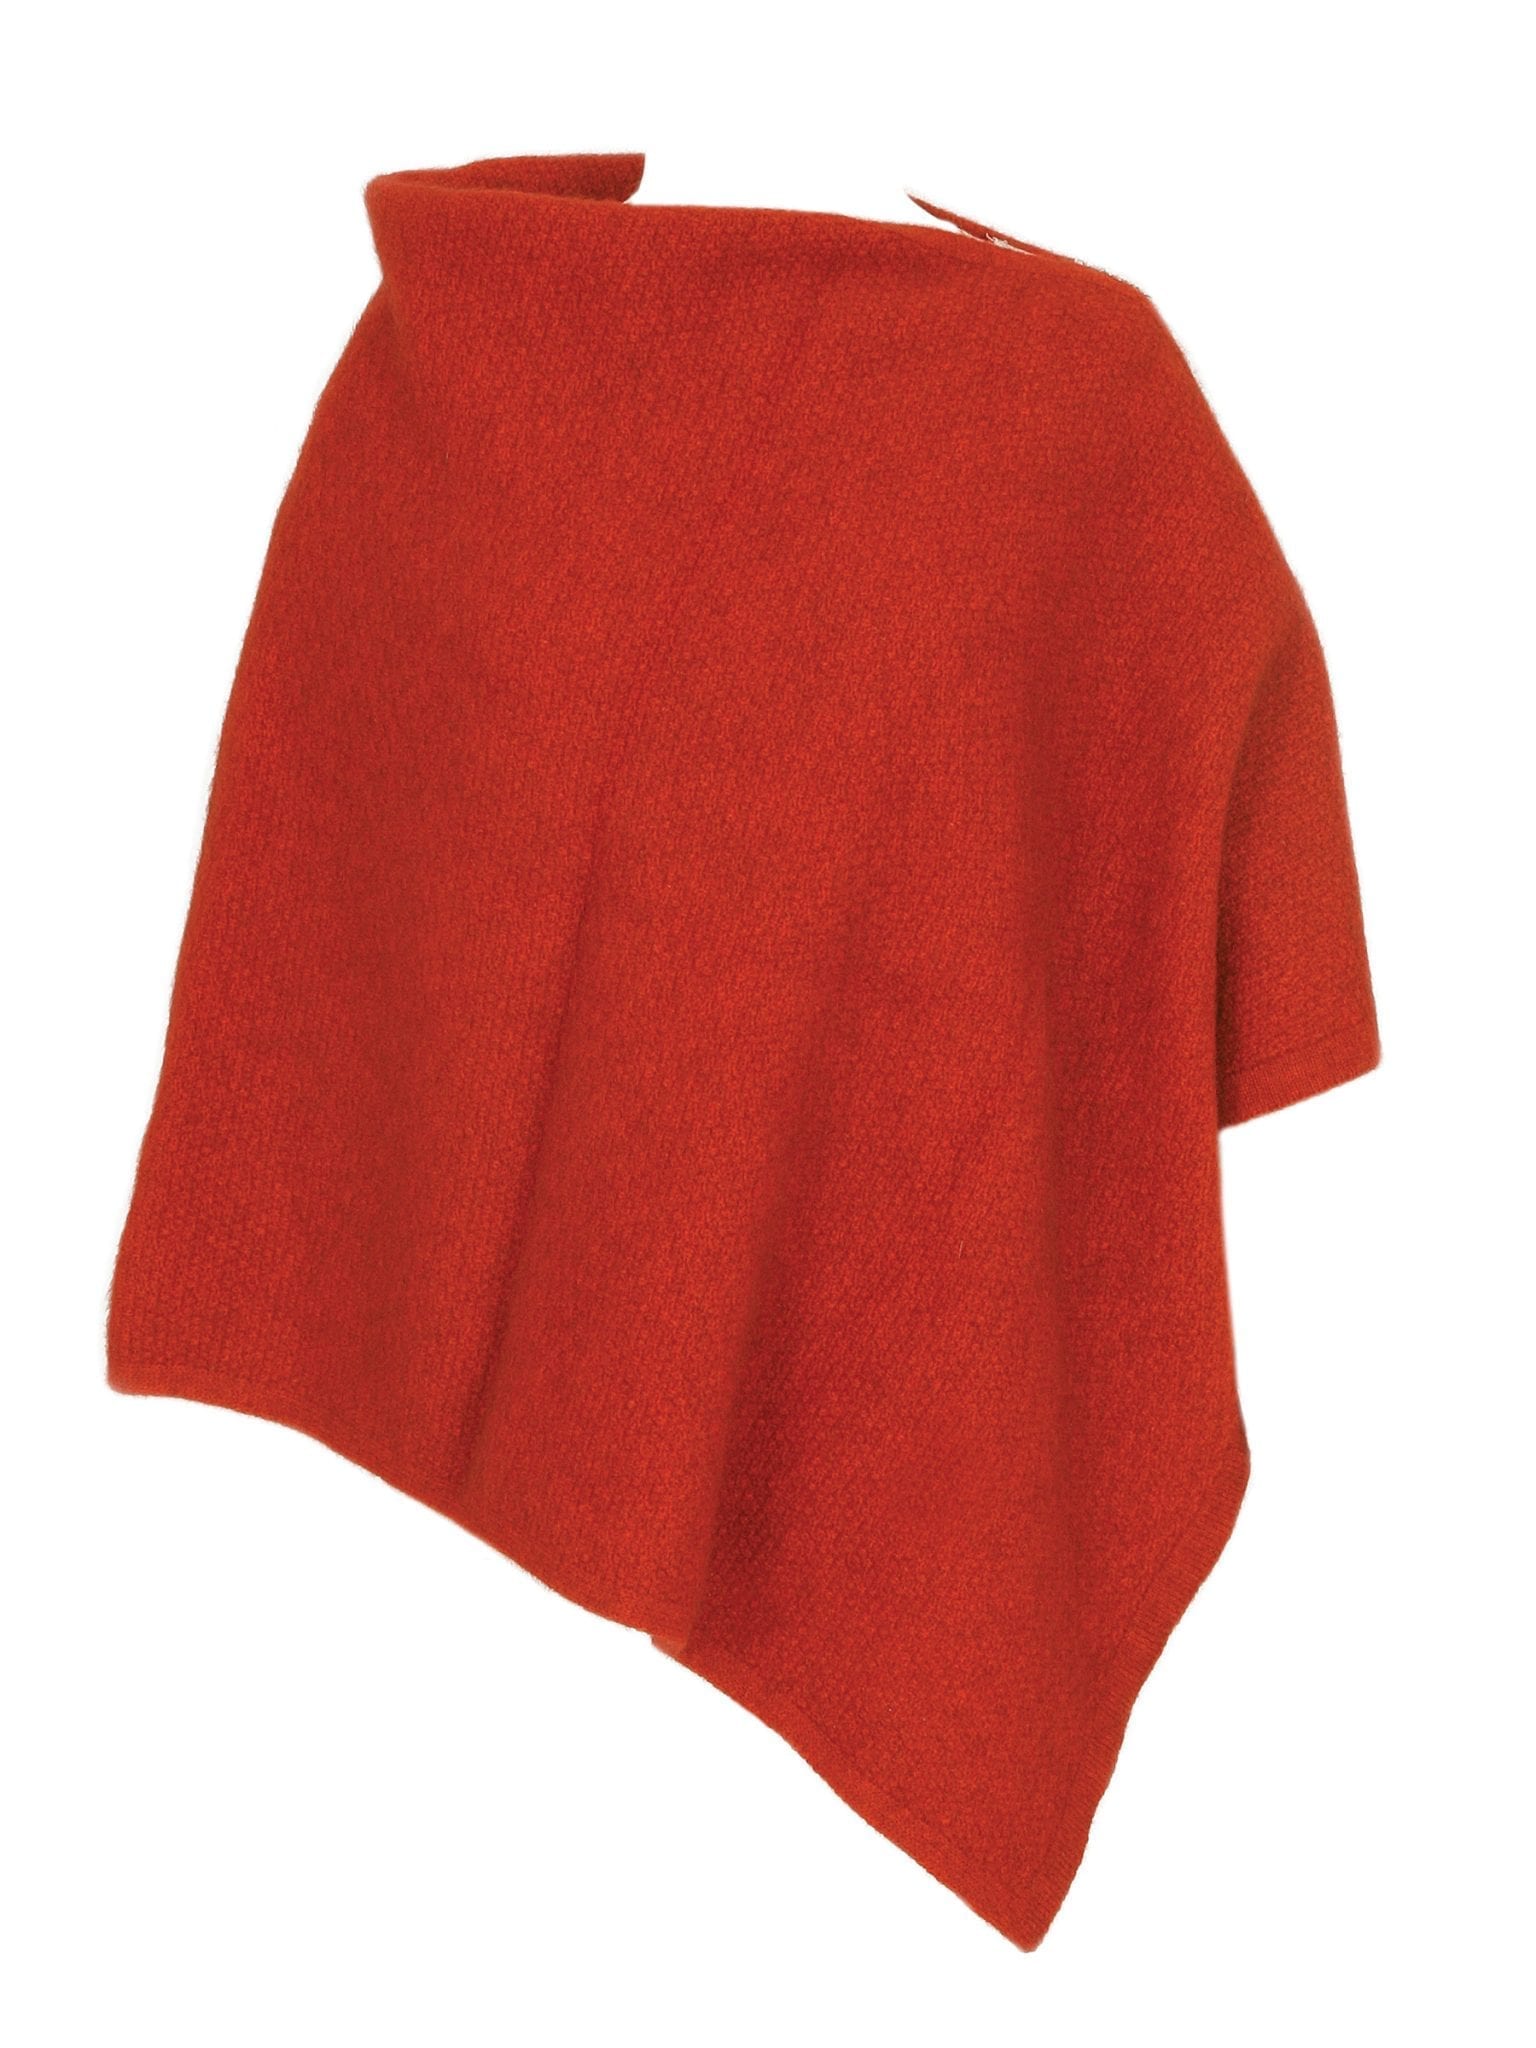 A beautiful textured wrap that can be worn several ways - as a poncho with the zip over the shoulder, zip to the front like a cape, as a wrap or scarf and if you feel a bit daring, a skirt! Available in 12 colourways. Made in NZ by Lothlorian. Pumpkin.